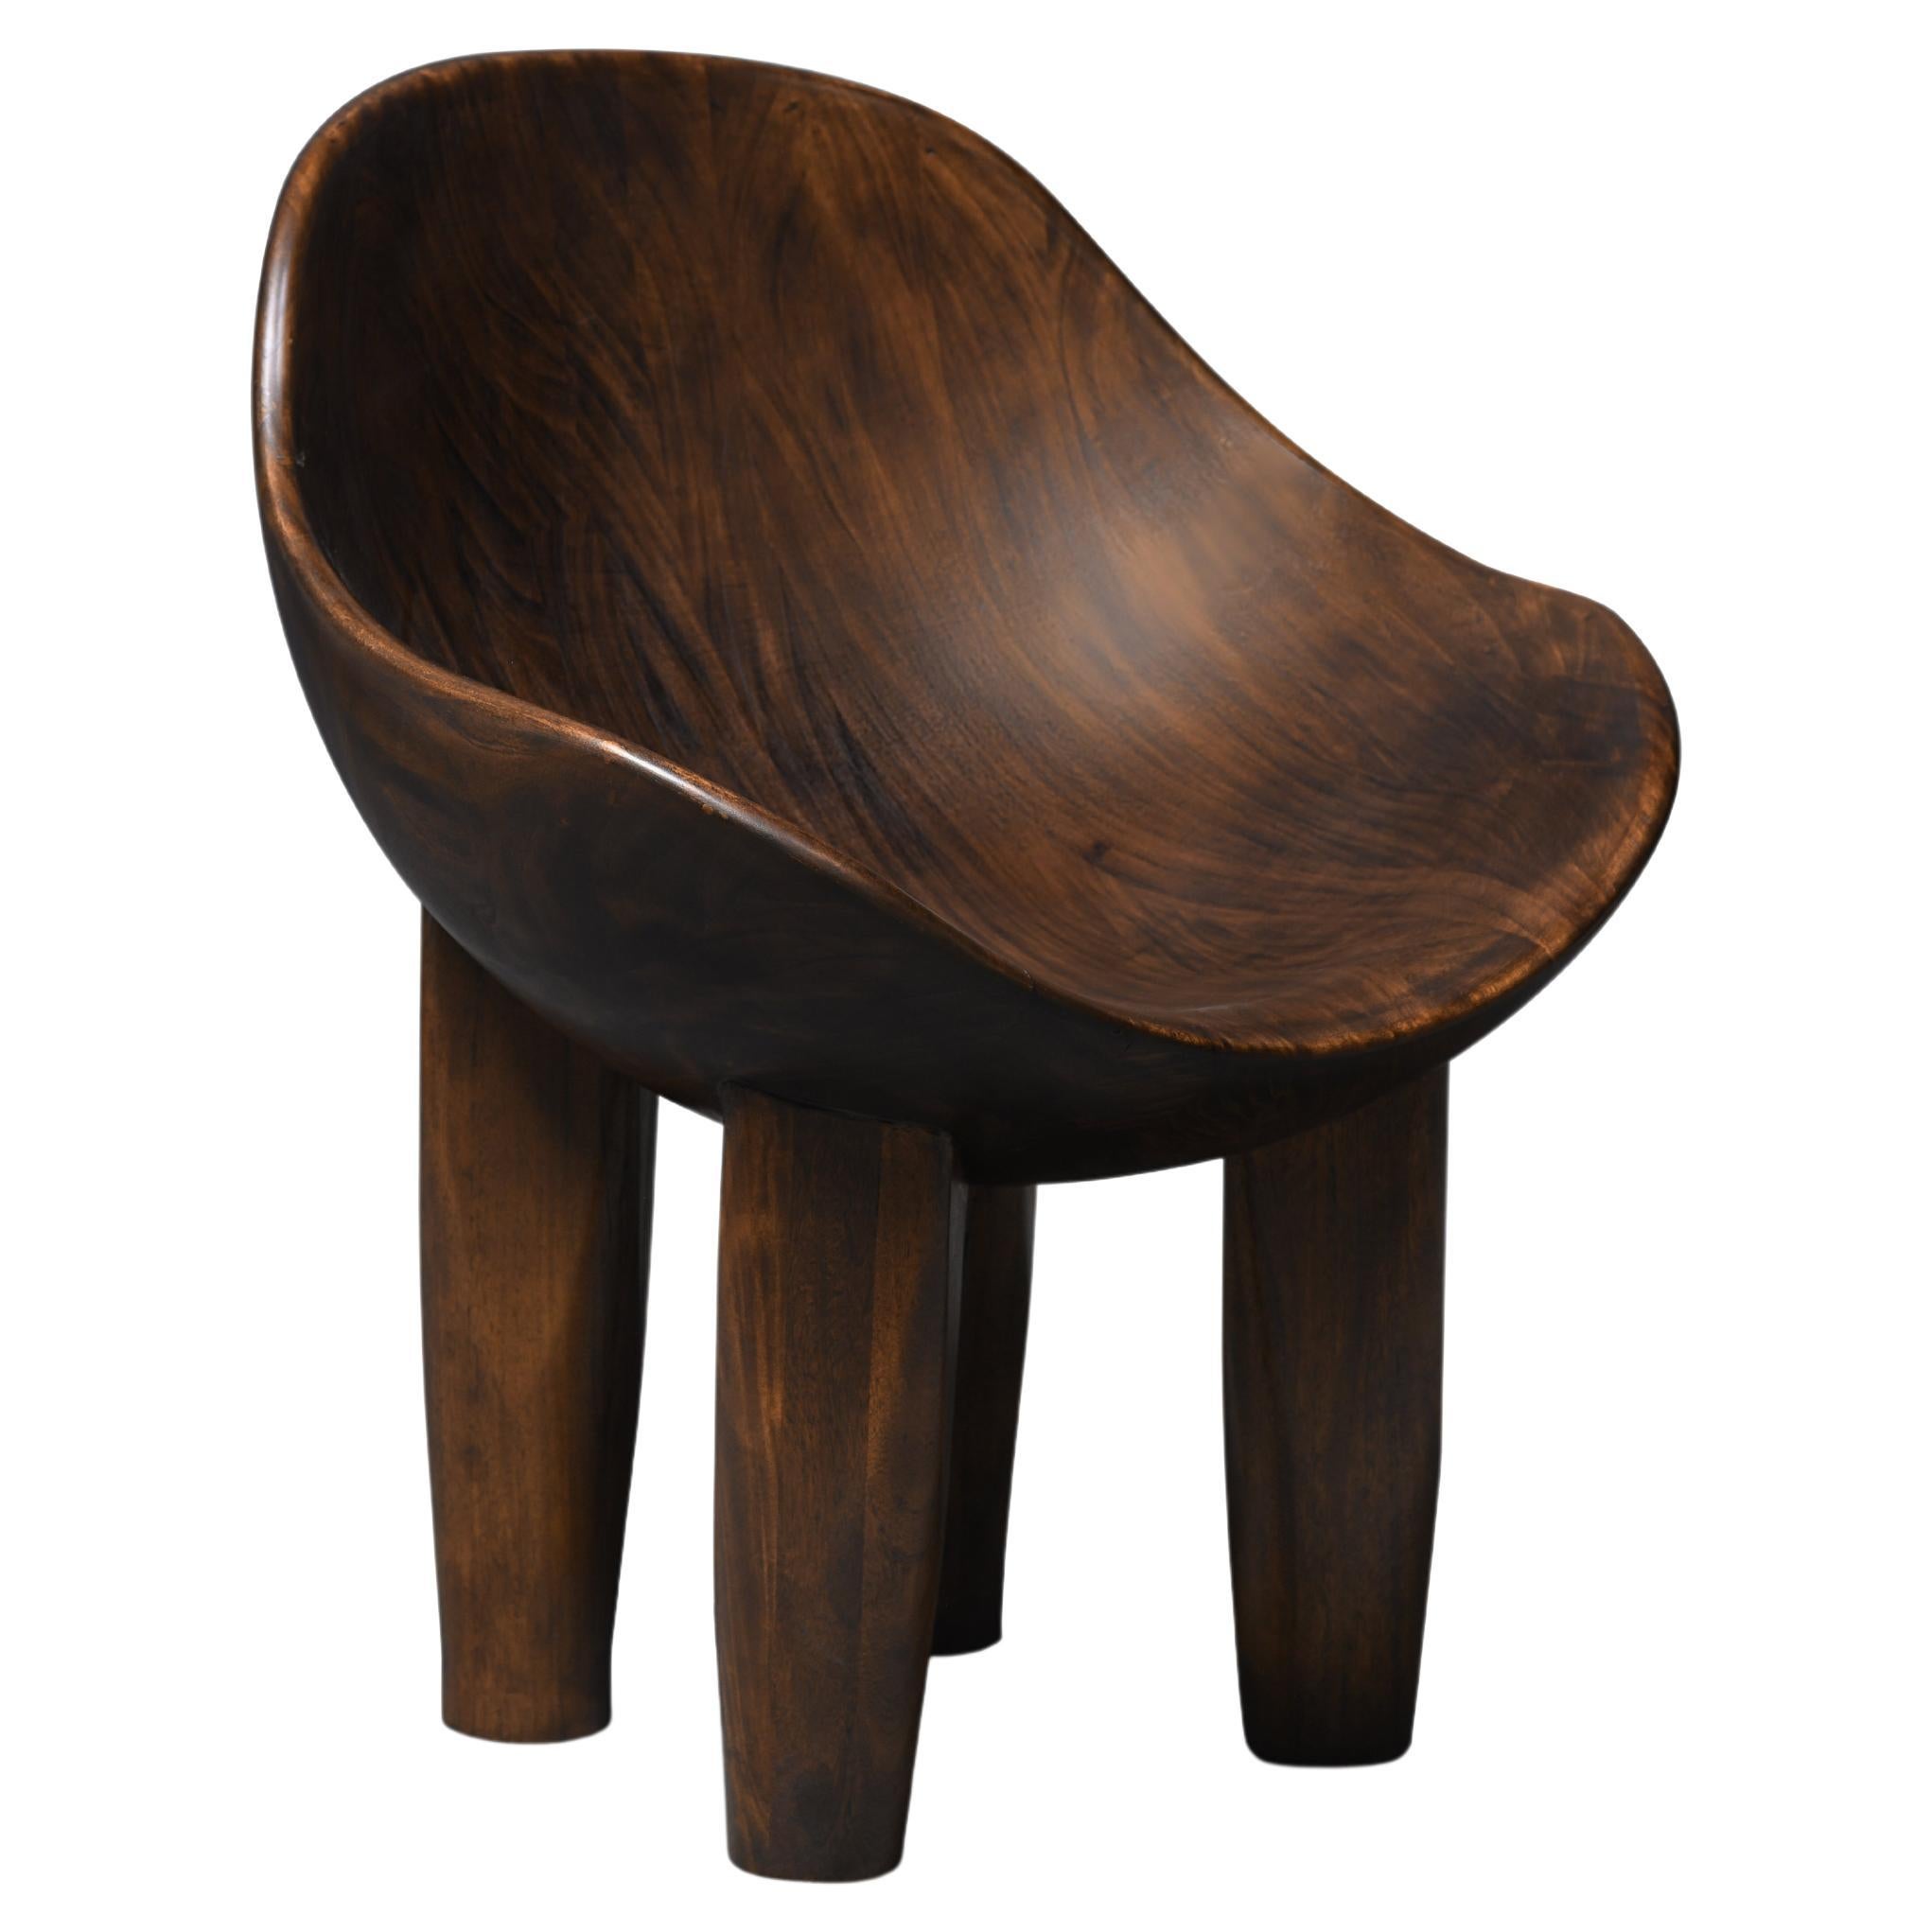 The Aman chair is fully sculpted from solid wood with concave shape For Sale